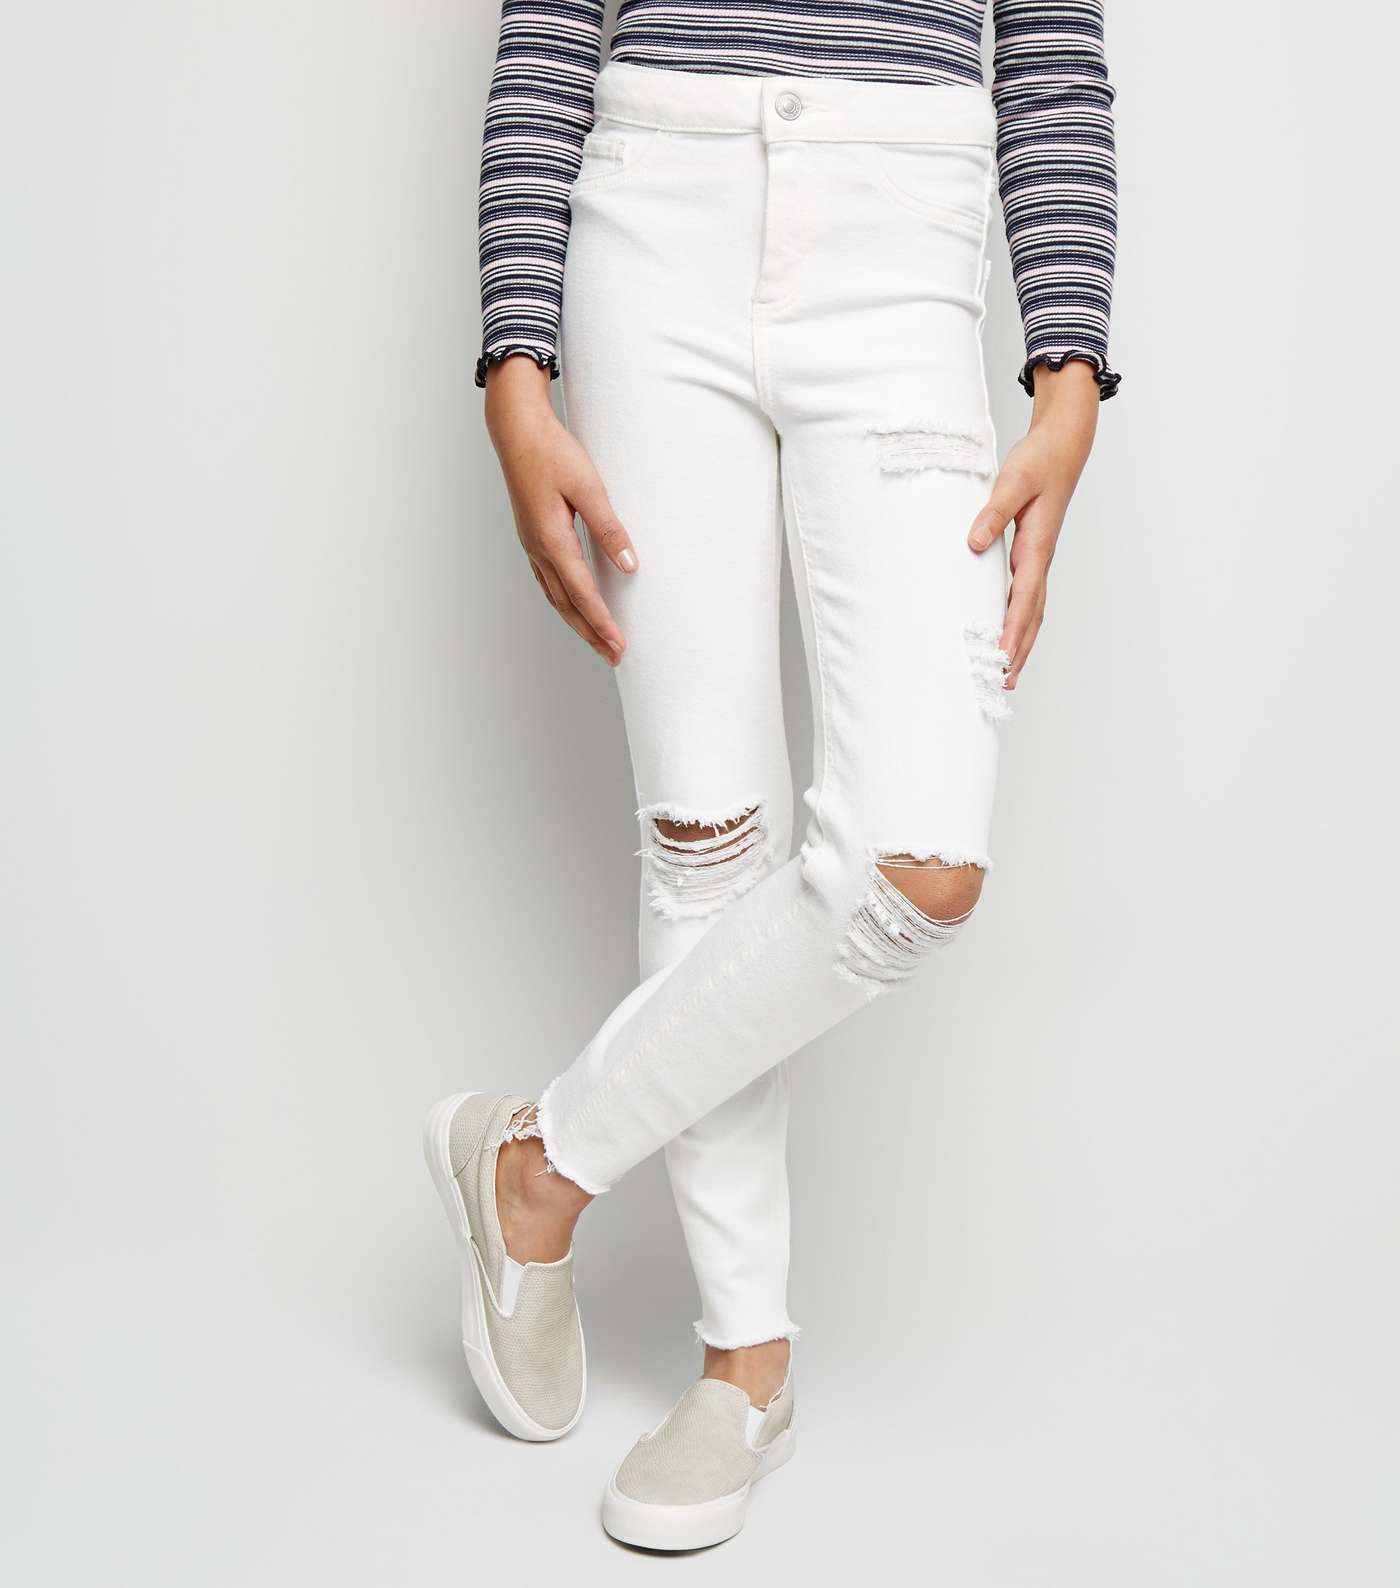 Girls White Ripped High Waist Skinny Jeans Image 2